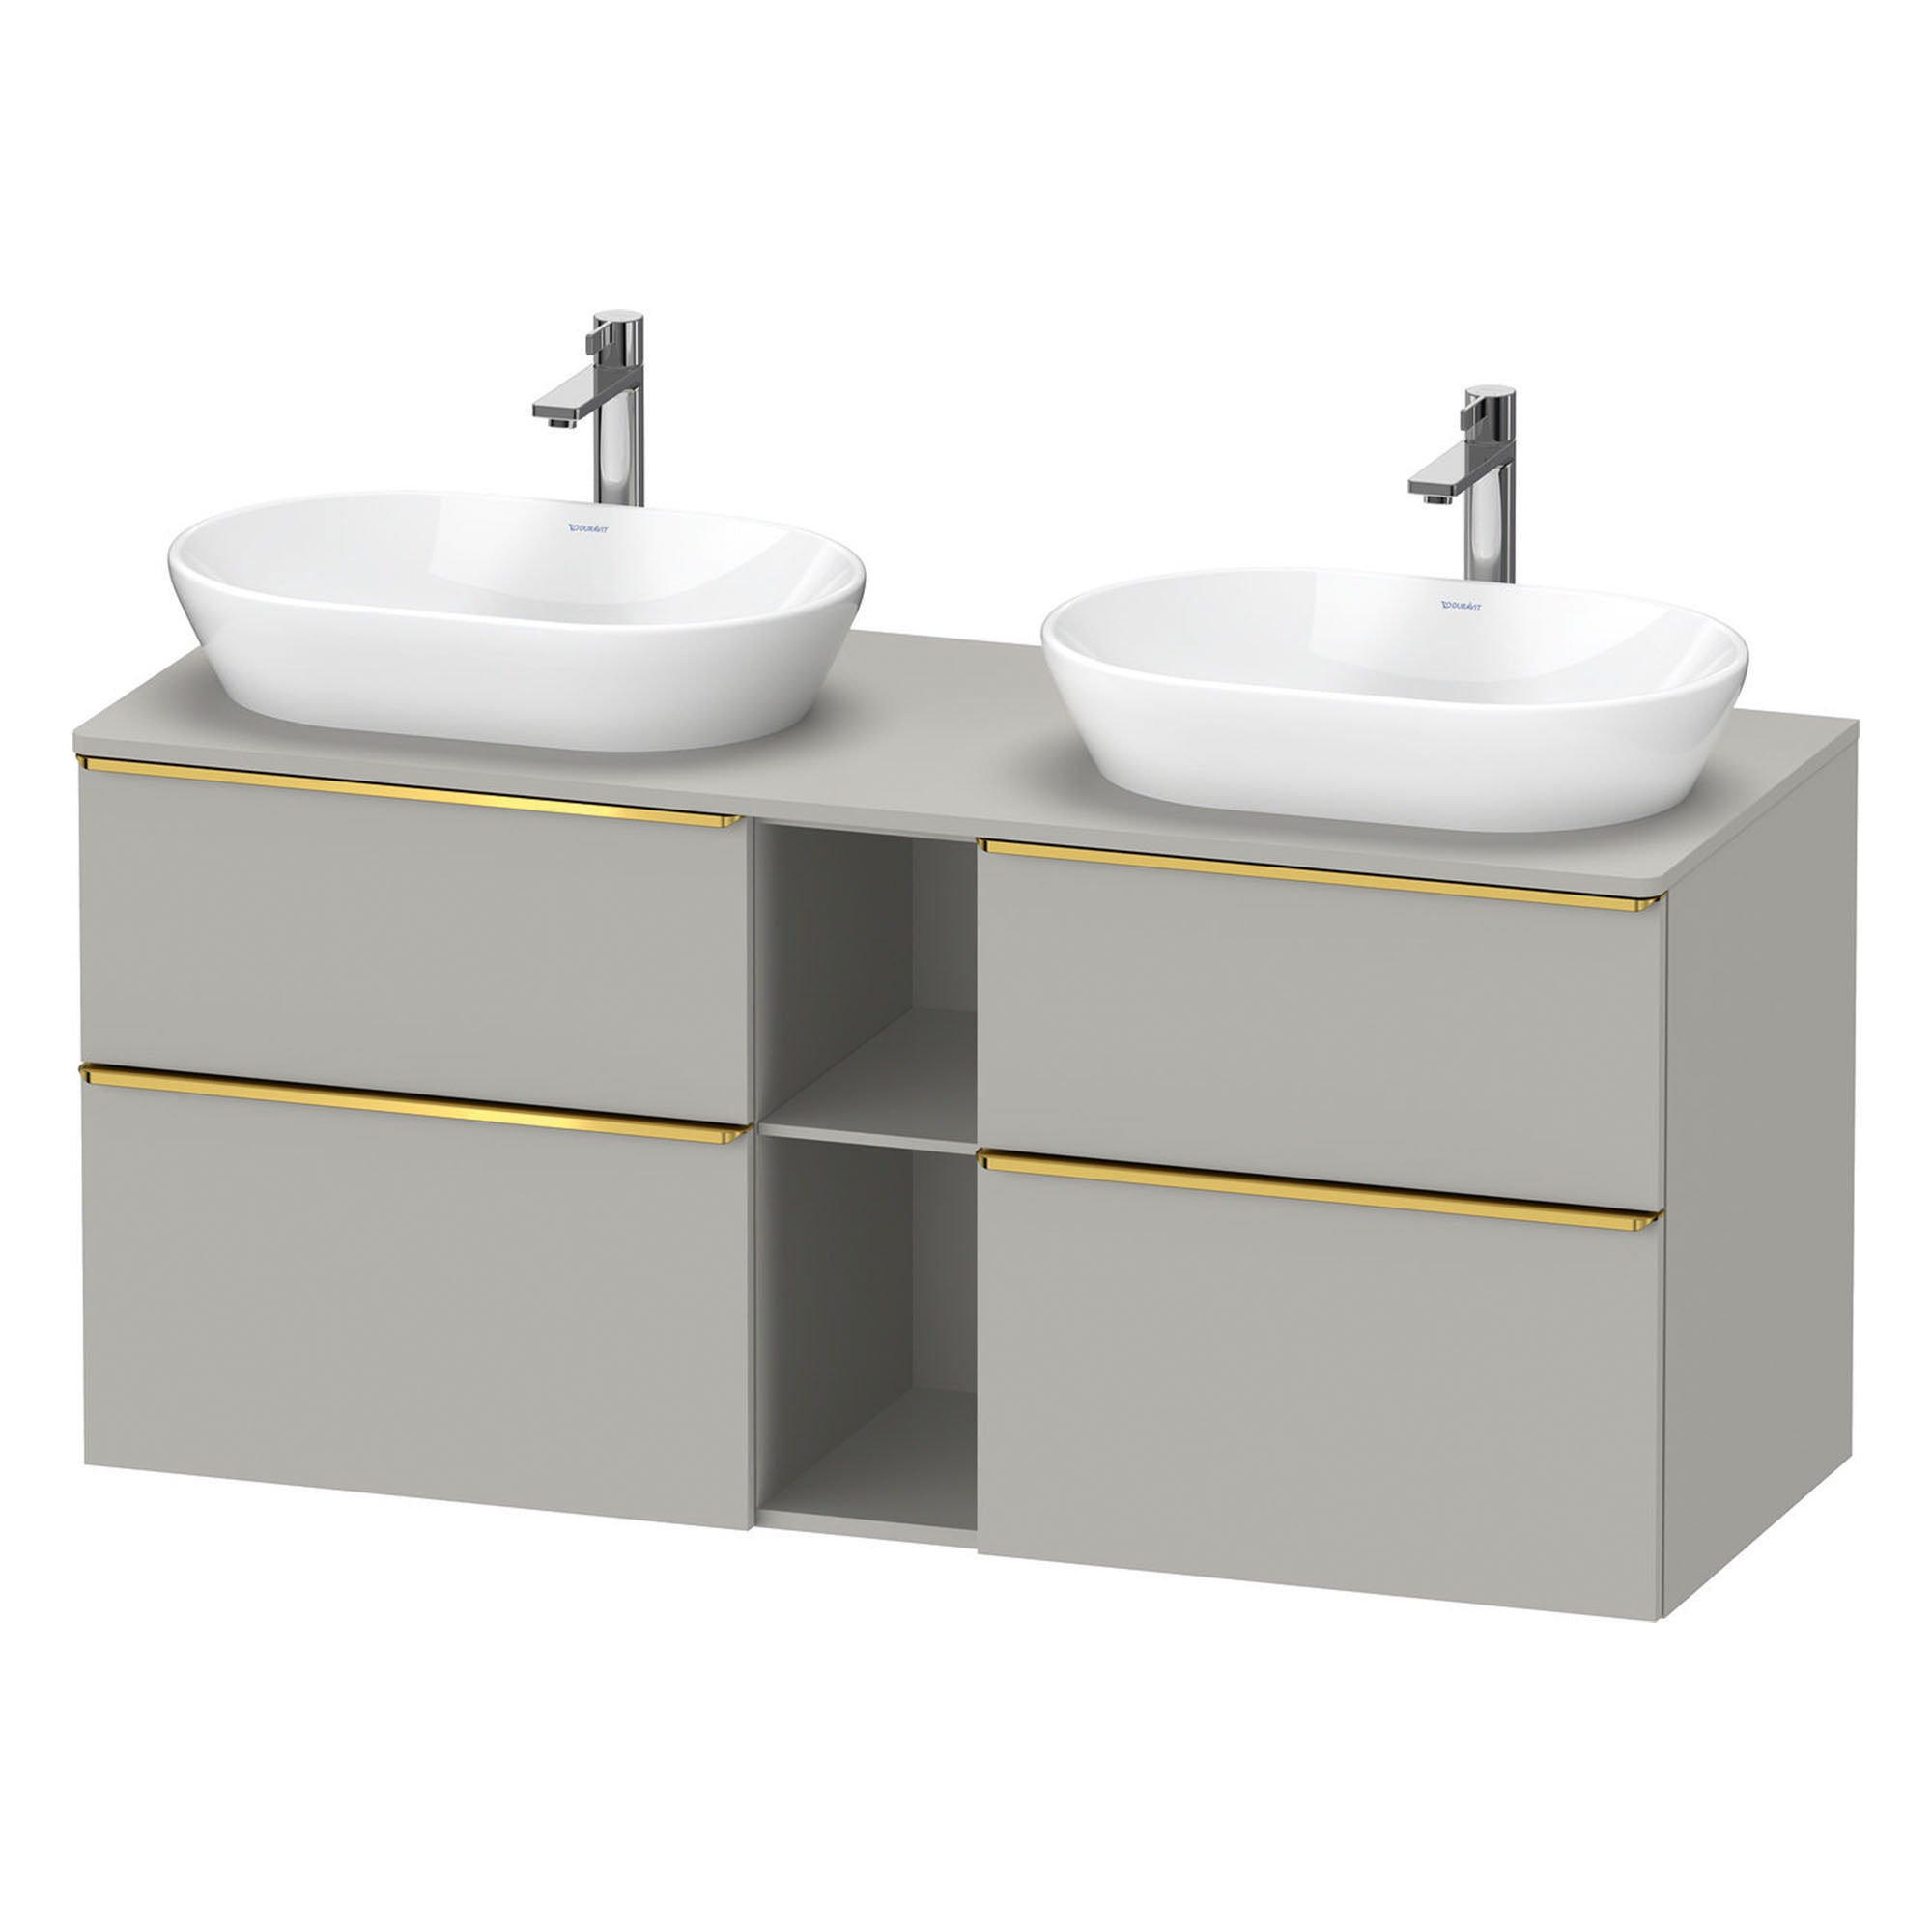 duravit d-neo 1400 wall mounted vanity unit with worktop 2 open shelves concrete grey gold handles